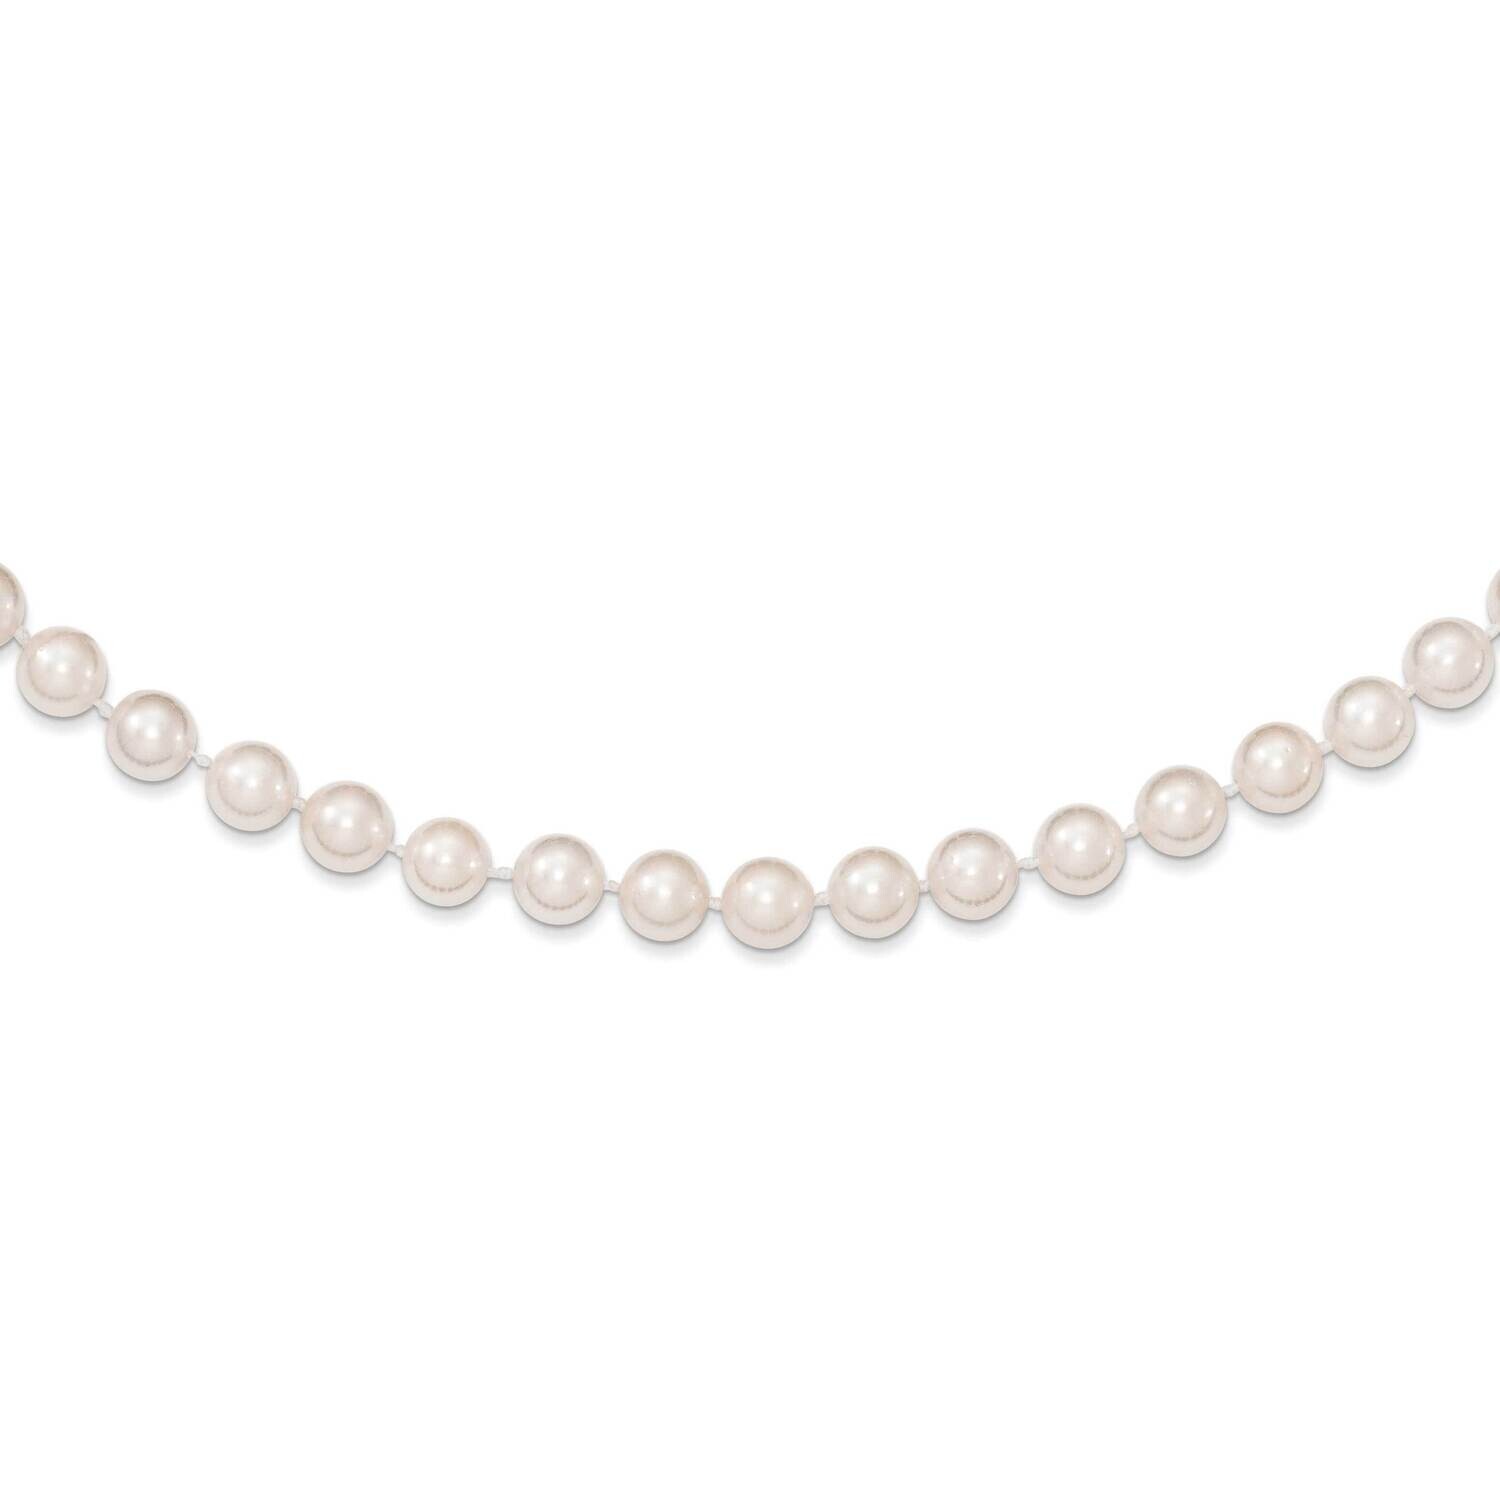 6-7mm Round White Saltwater Akoya Cultured Pearl Necklace 24 Inch 14k Gold PL60A-24